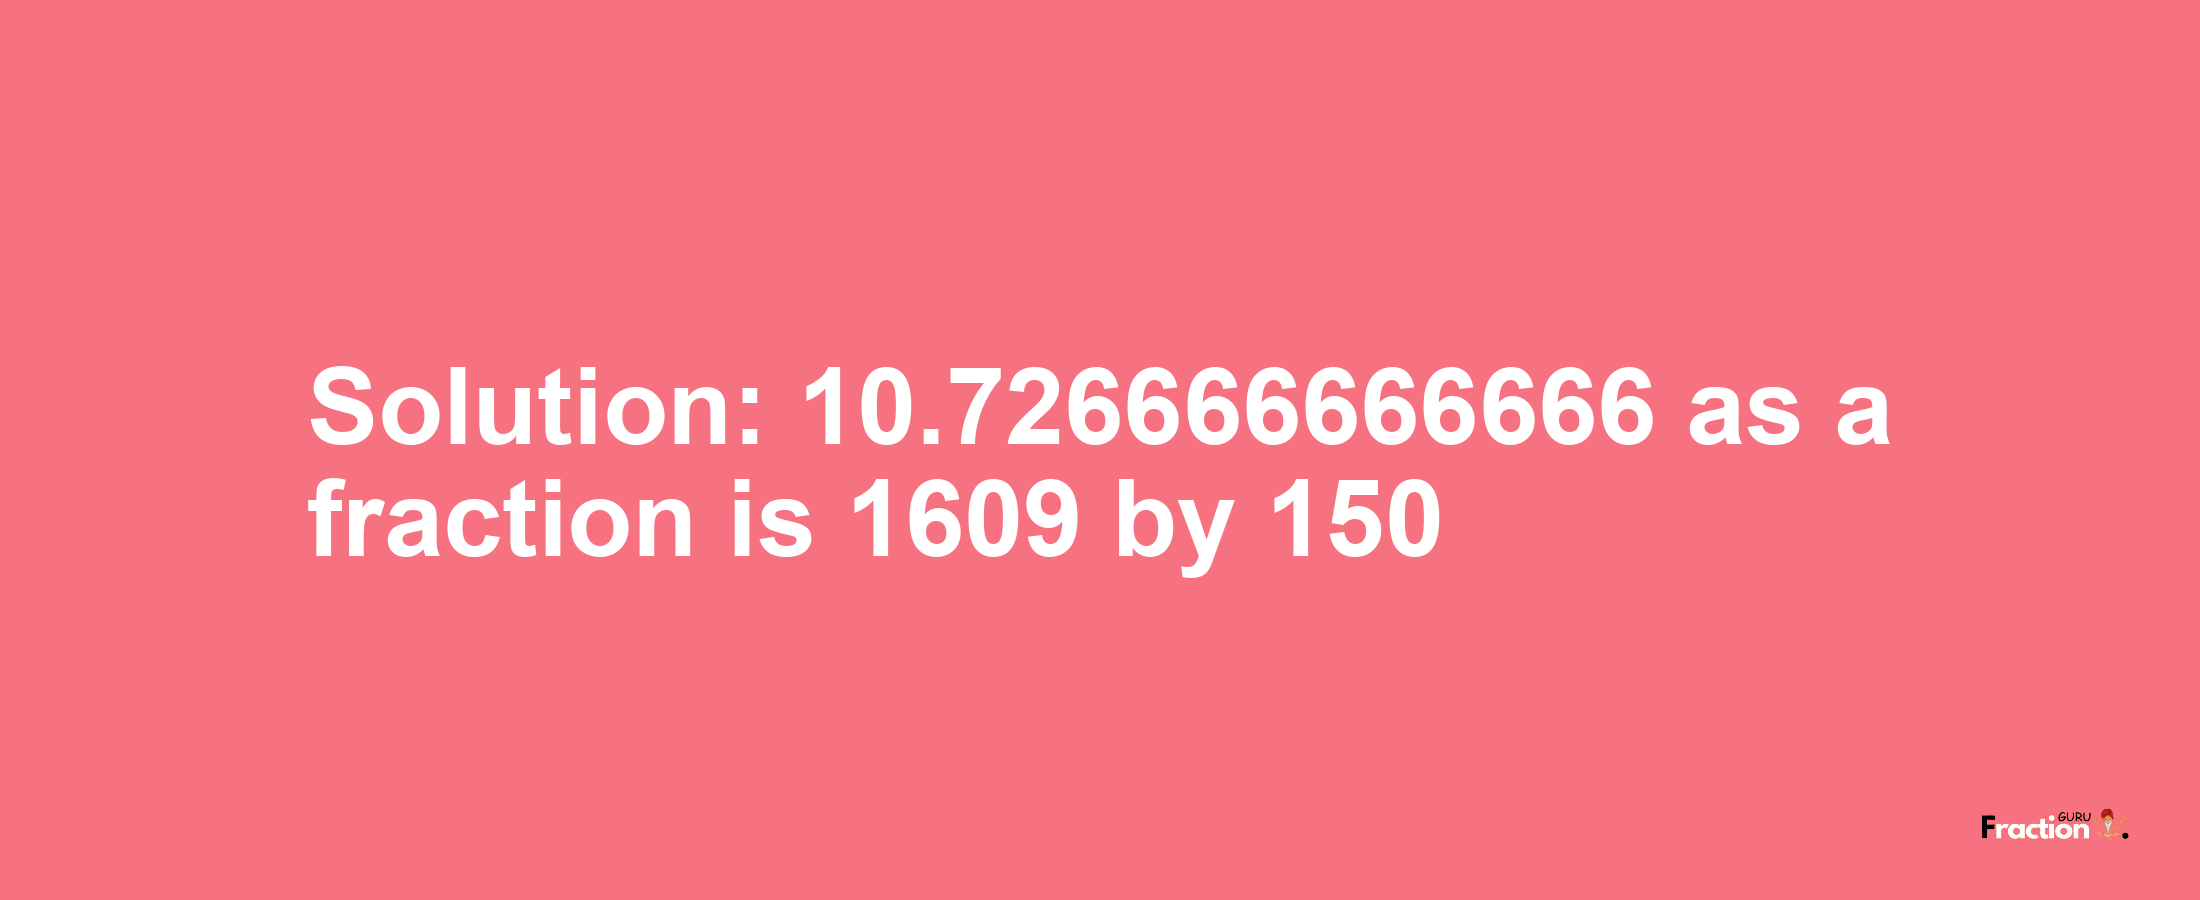 Solution:10.726666666666 as a fraction is 1609/150